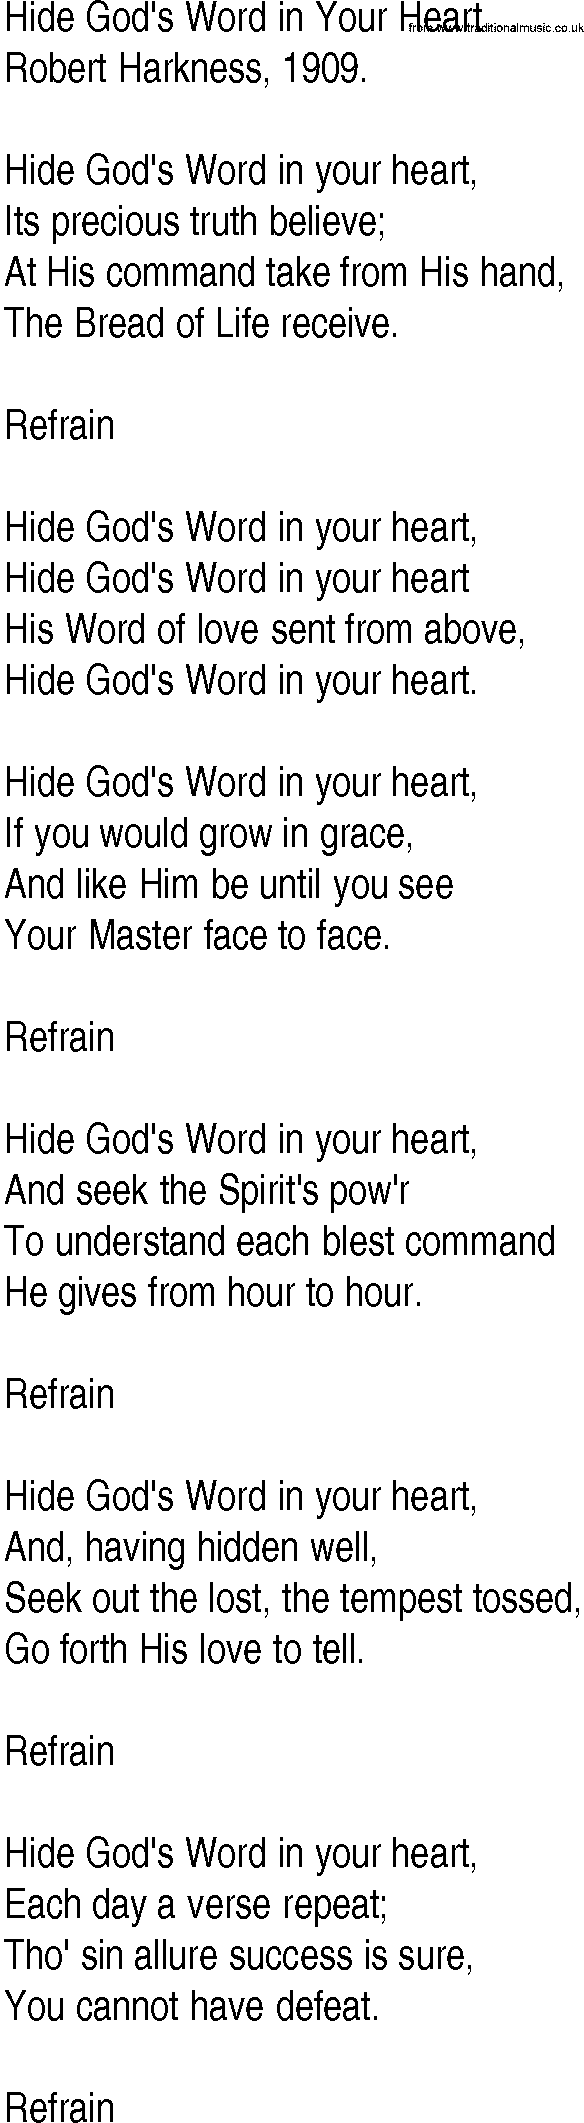 Hymn and Gospel Song: Hide God's Word in Your Heart by Robert Harkness lyrics